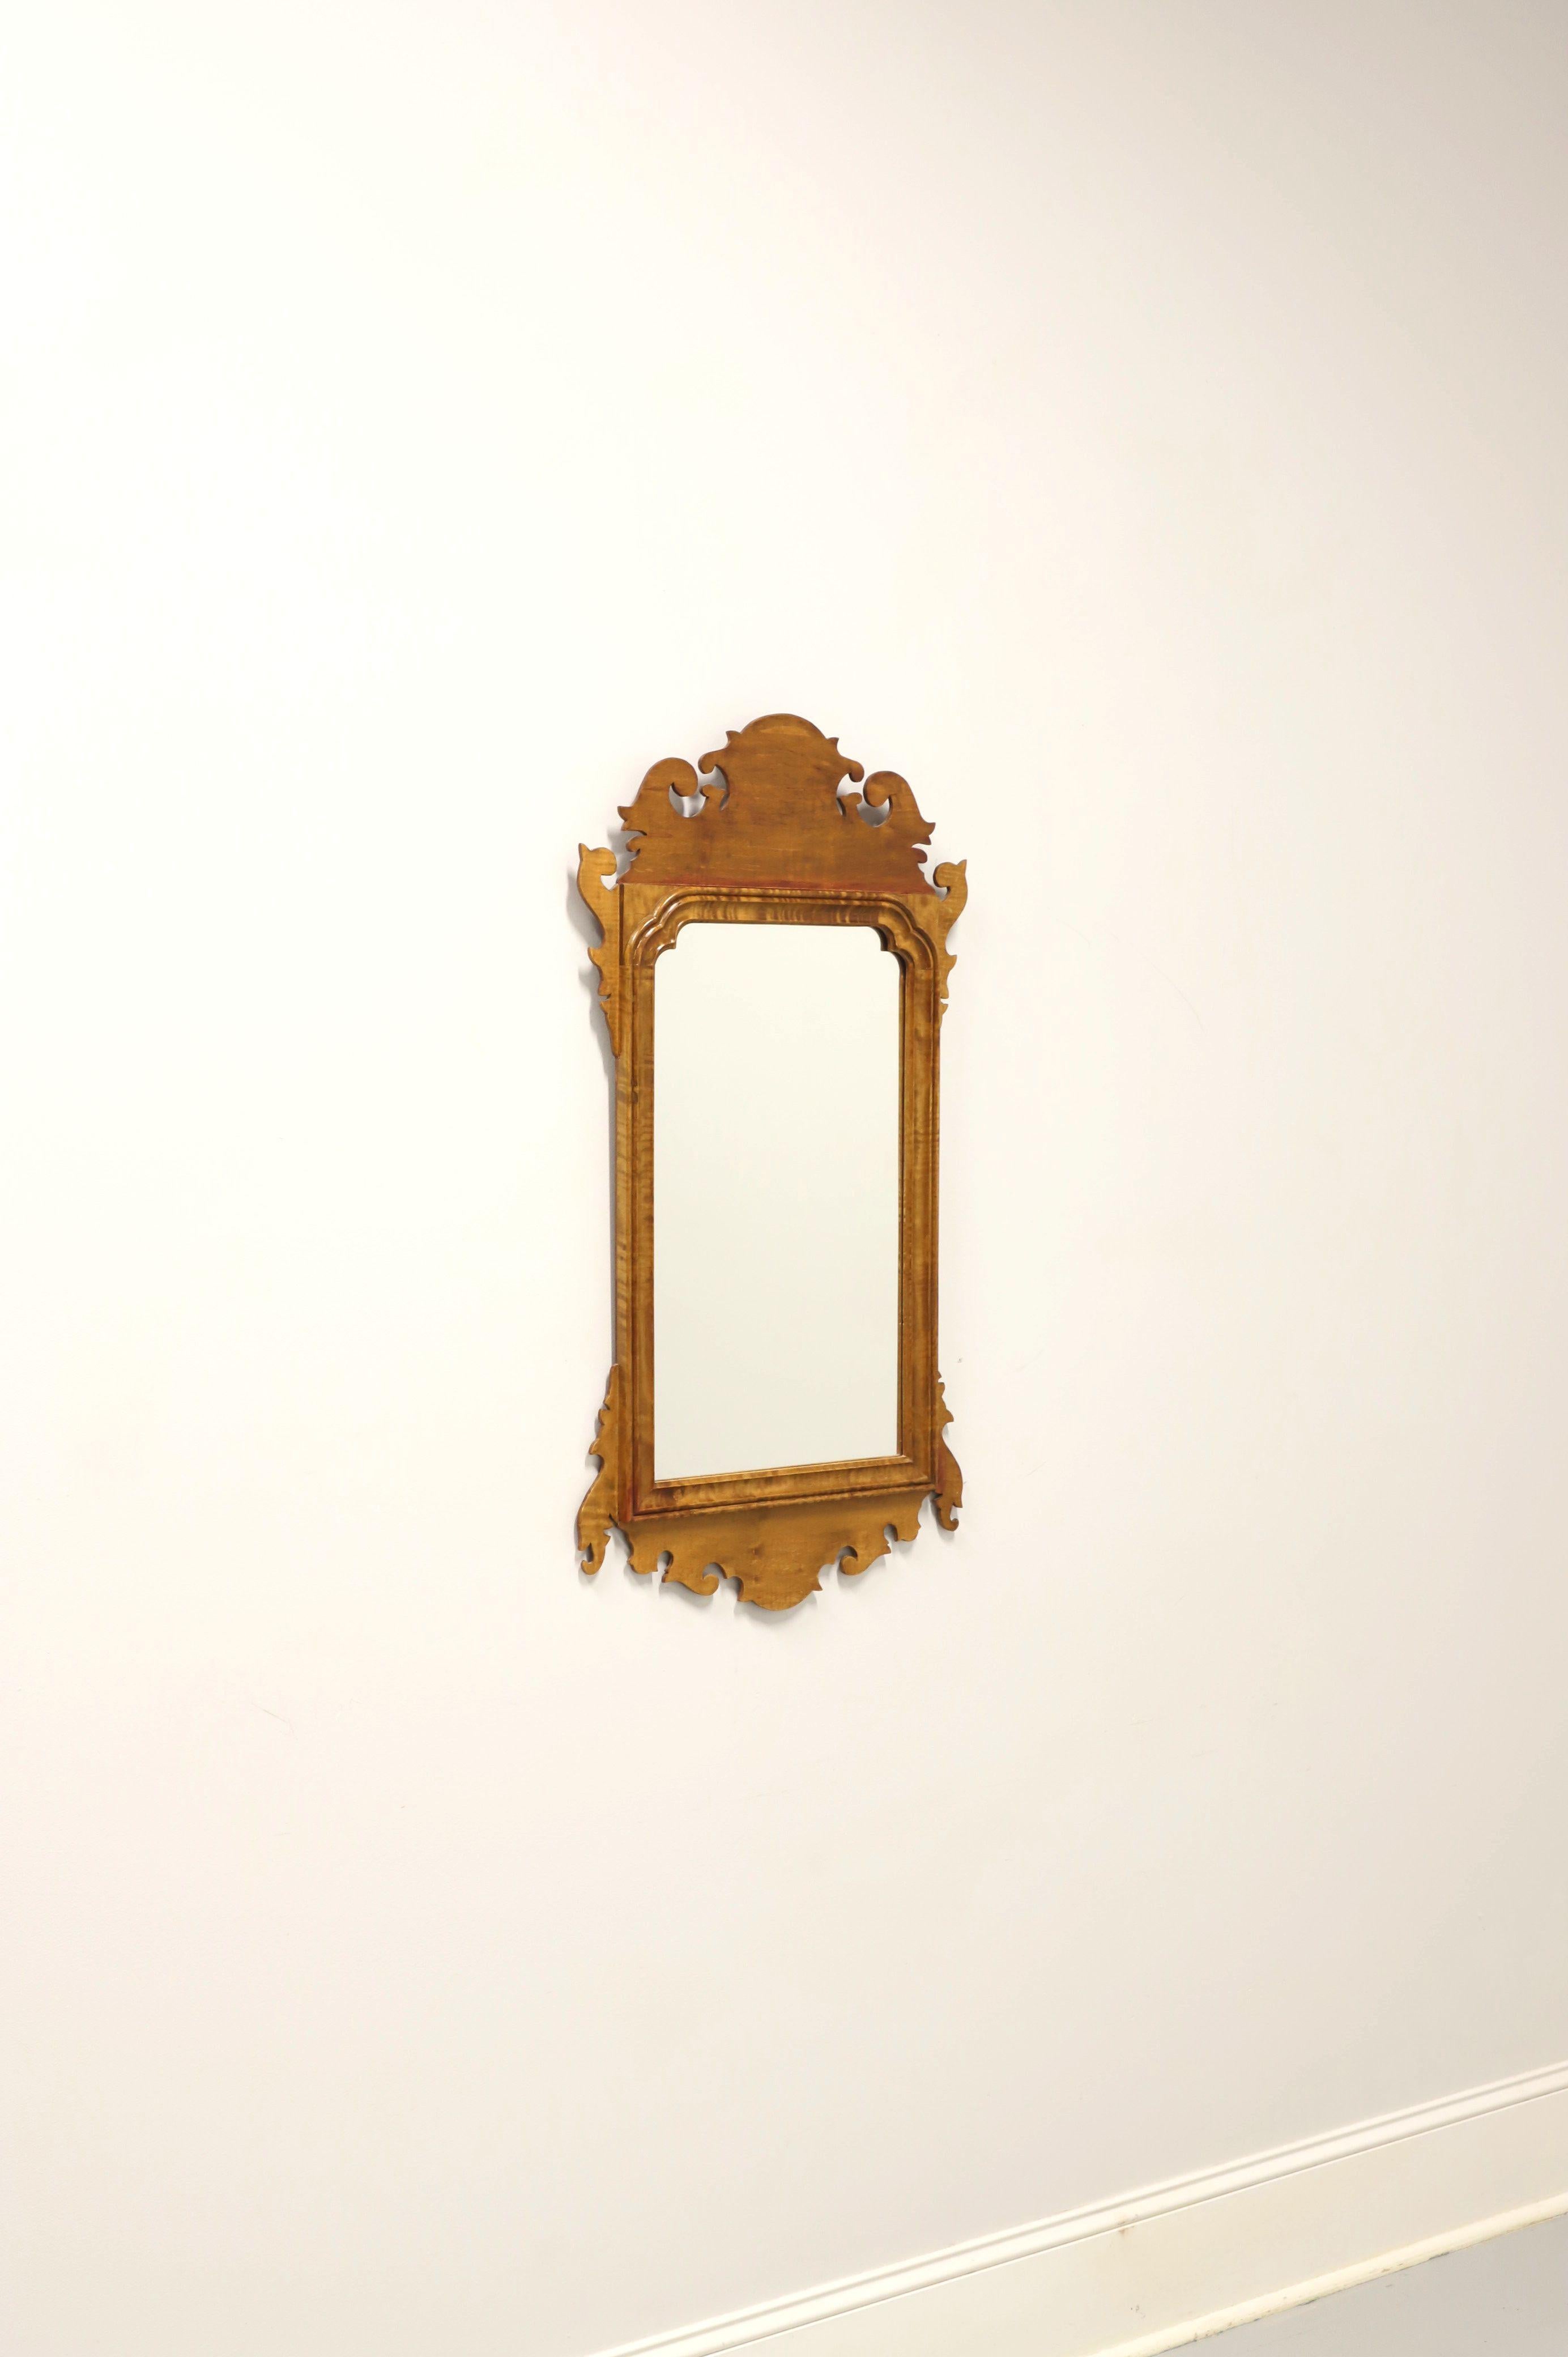 A Chippendale style wall mirror, unbranded. Mirror glass in a tiger maple frame with a light color finish, decorative carving to top & bottom, and carved wood bevel surrounding mirror glass. Made in the USA, in the mid 20th Century.

Measures: